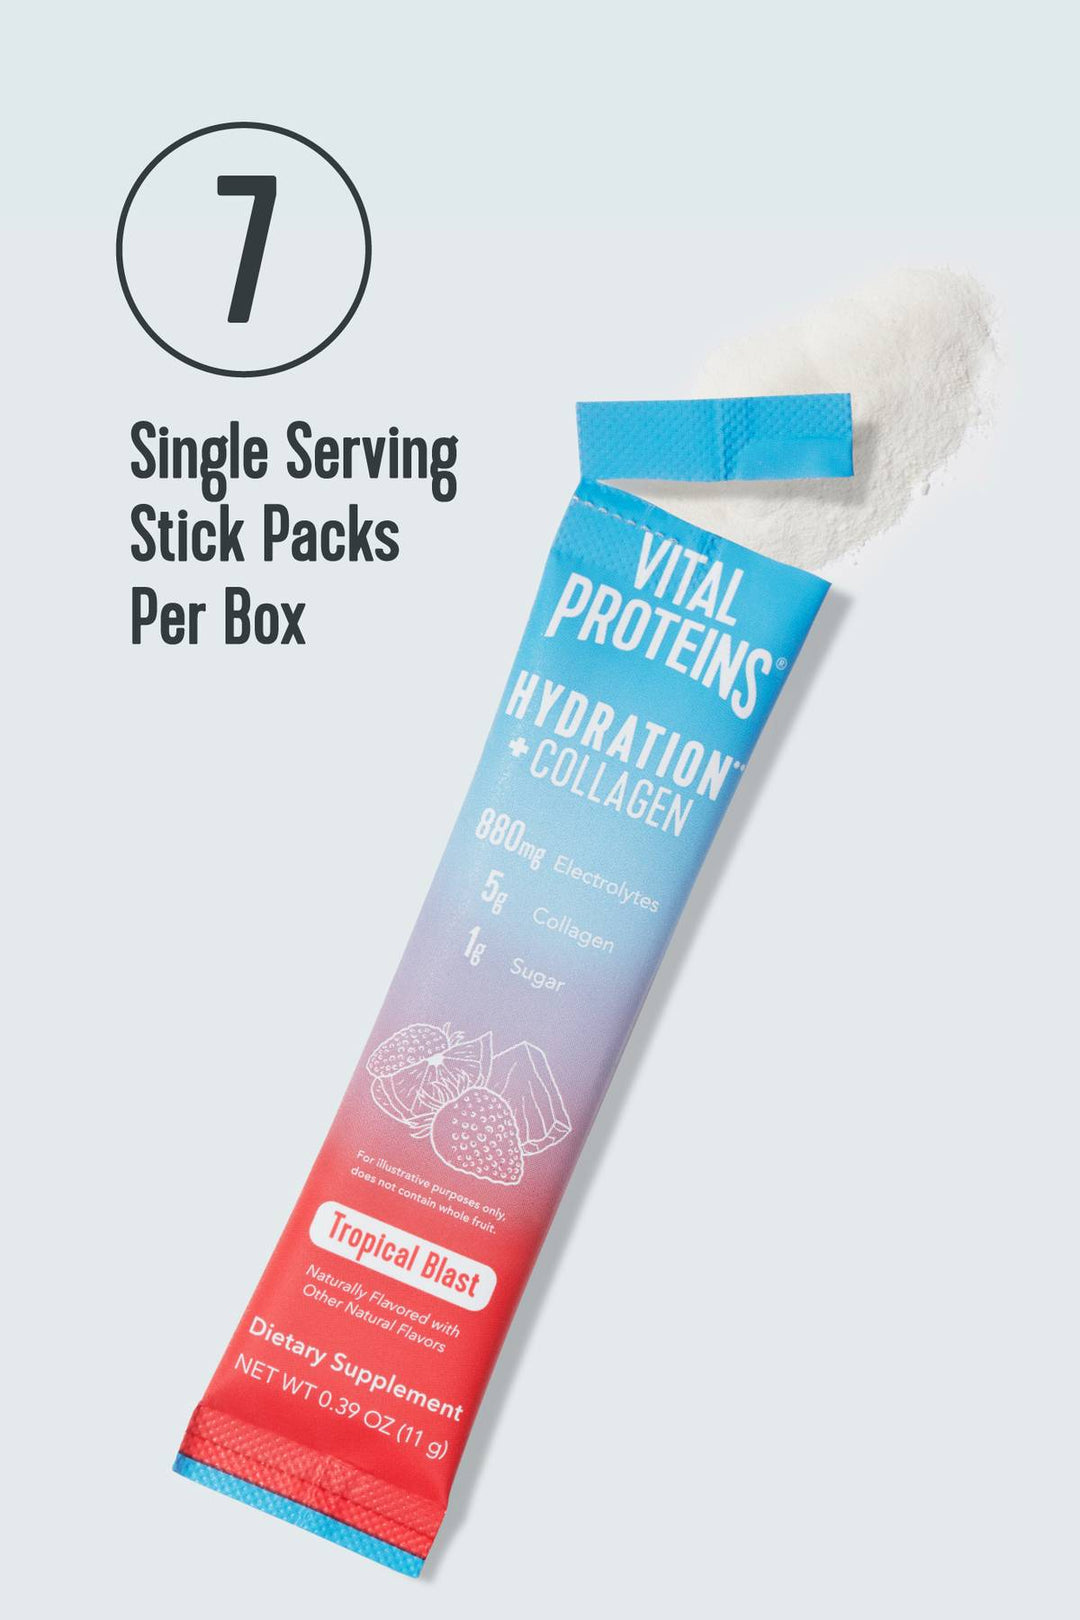 Vital Proteins Hydration + Collagen Tropical Blast Stick Pack Box 7ct